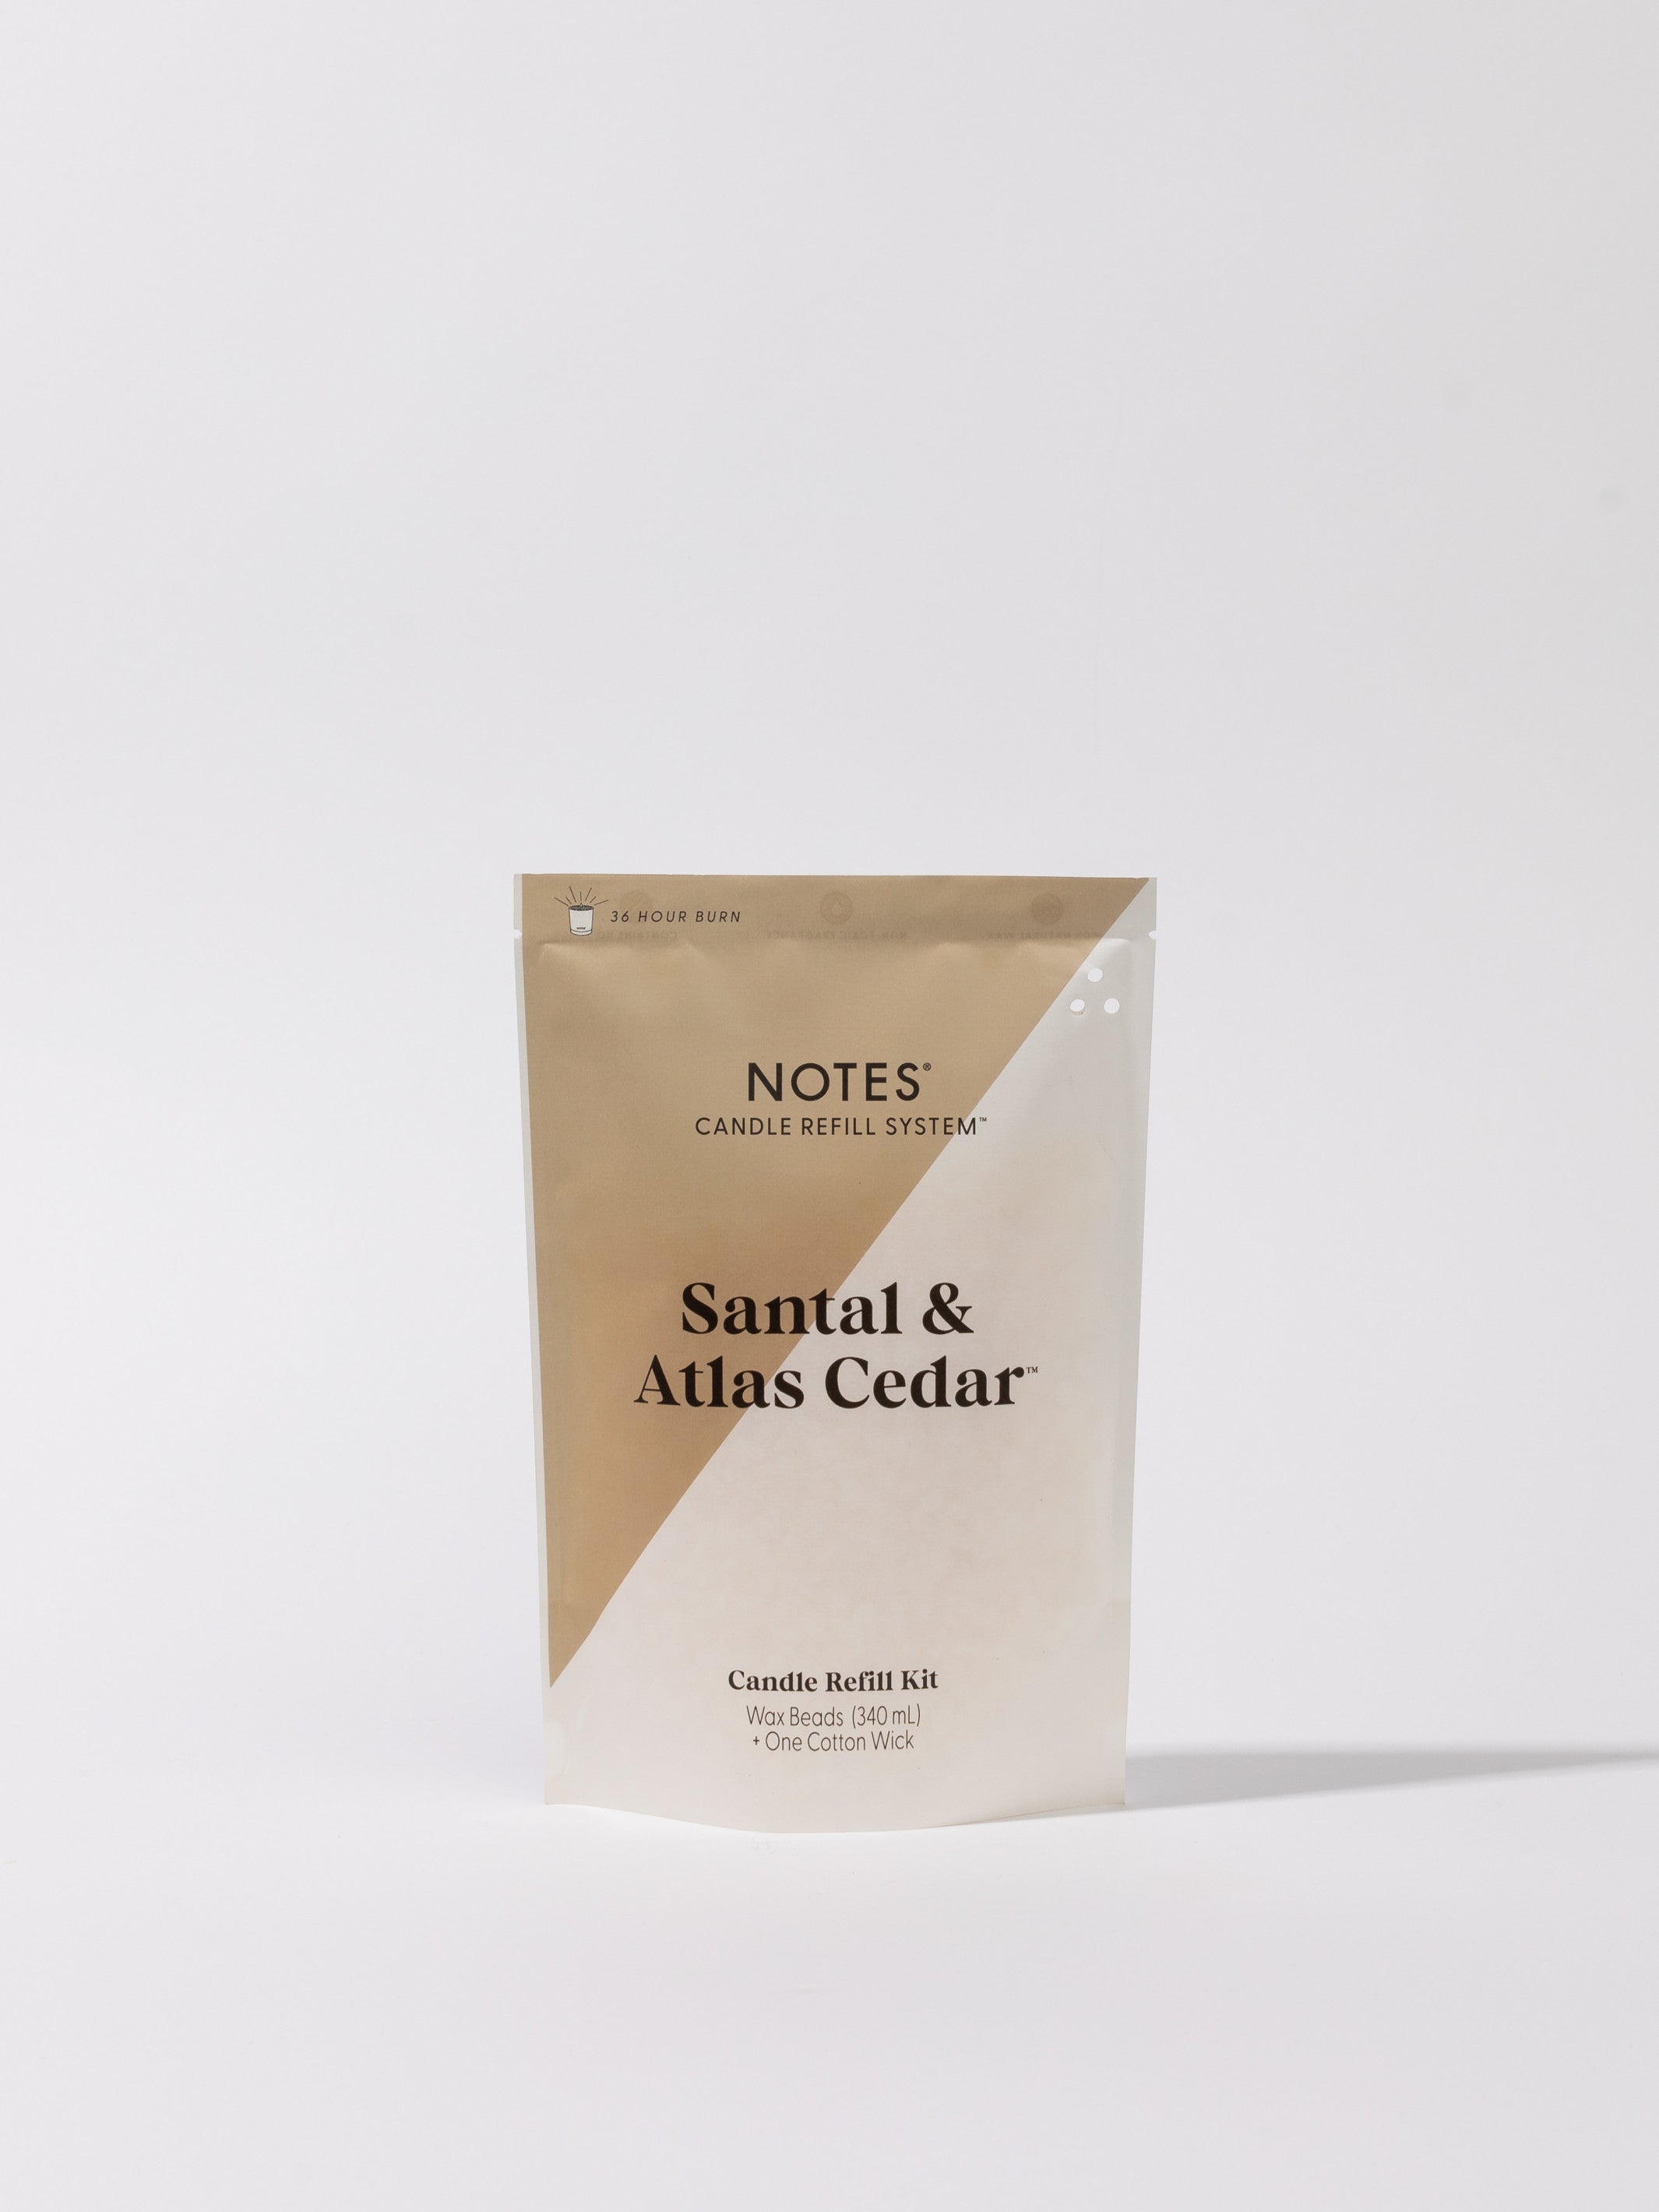 Sustainable Candle Refill Kit - NOTES Santal & Atlas Cedar – NOTES Candle